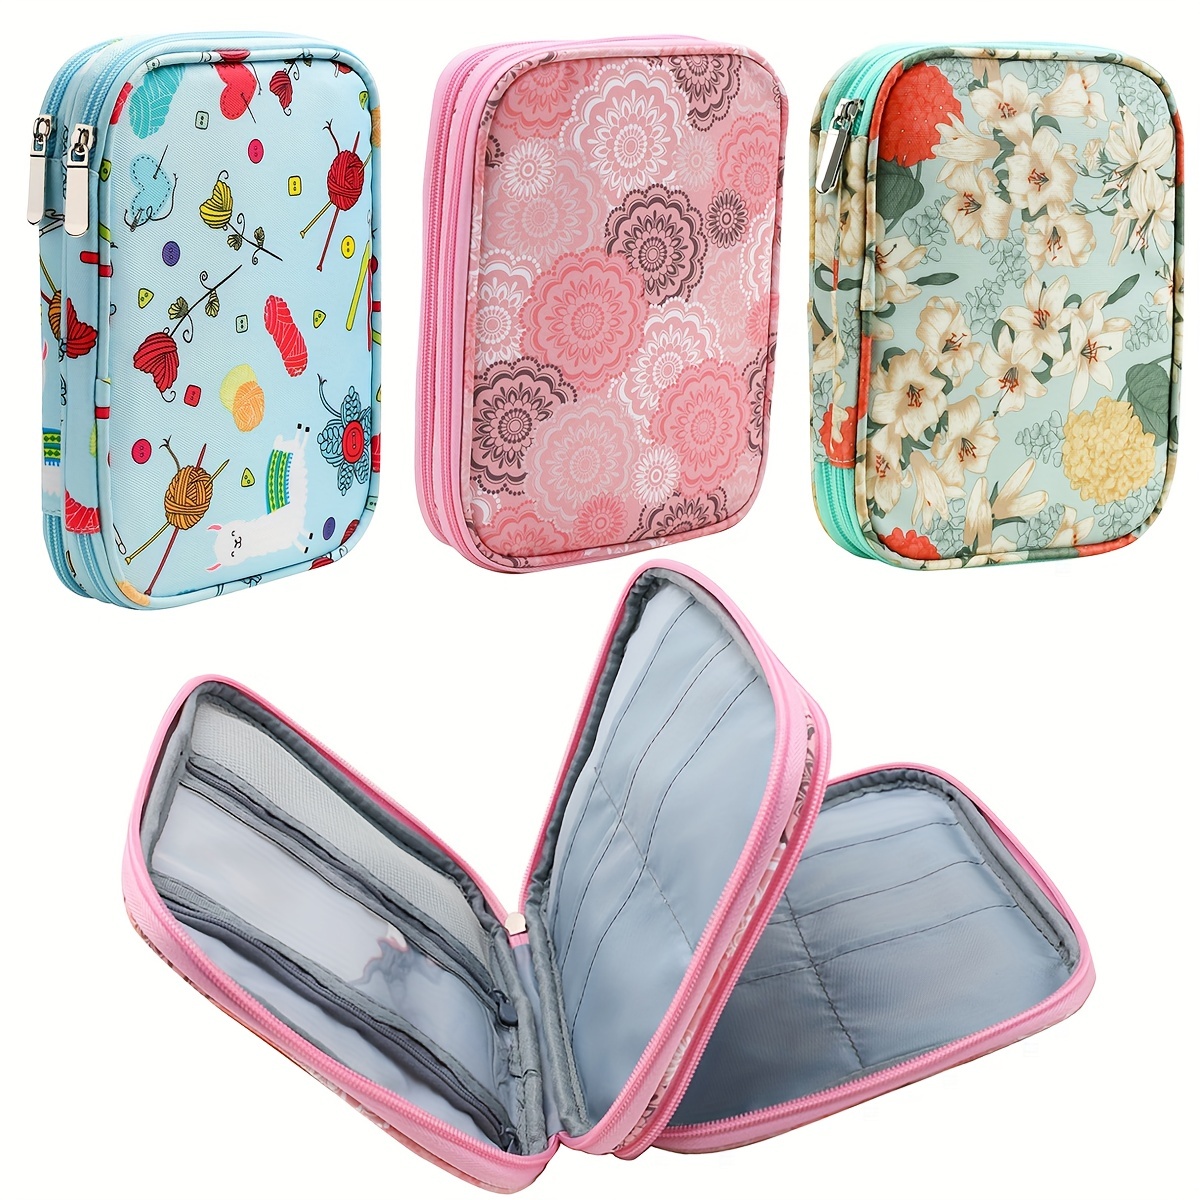 Knitting Needles Case, Travel Portable Storage Bag For Sewing